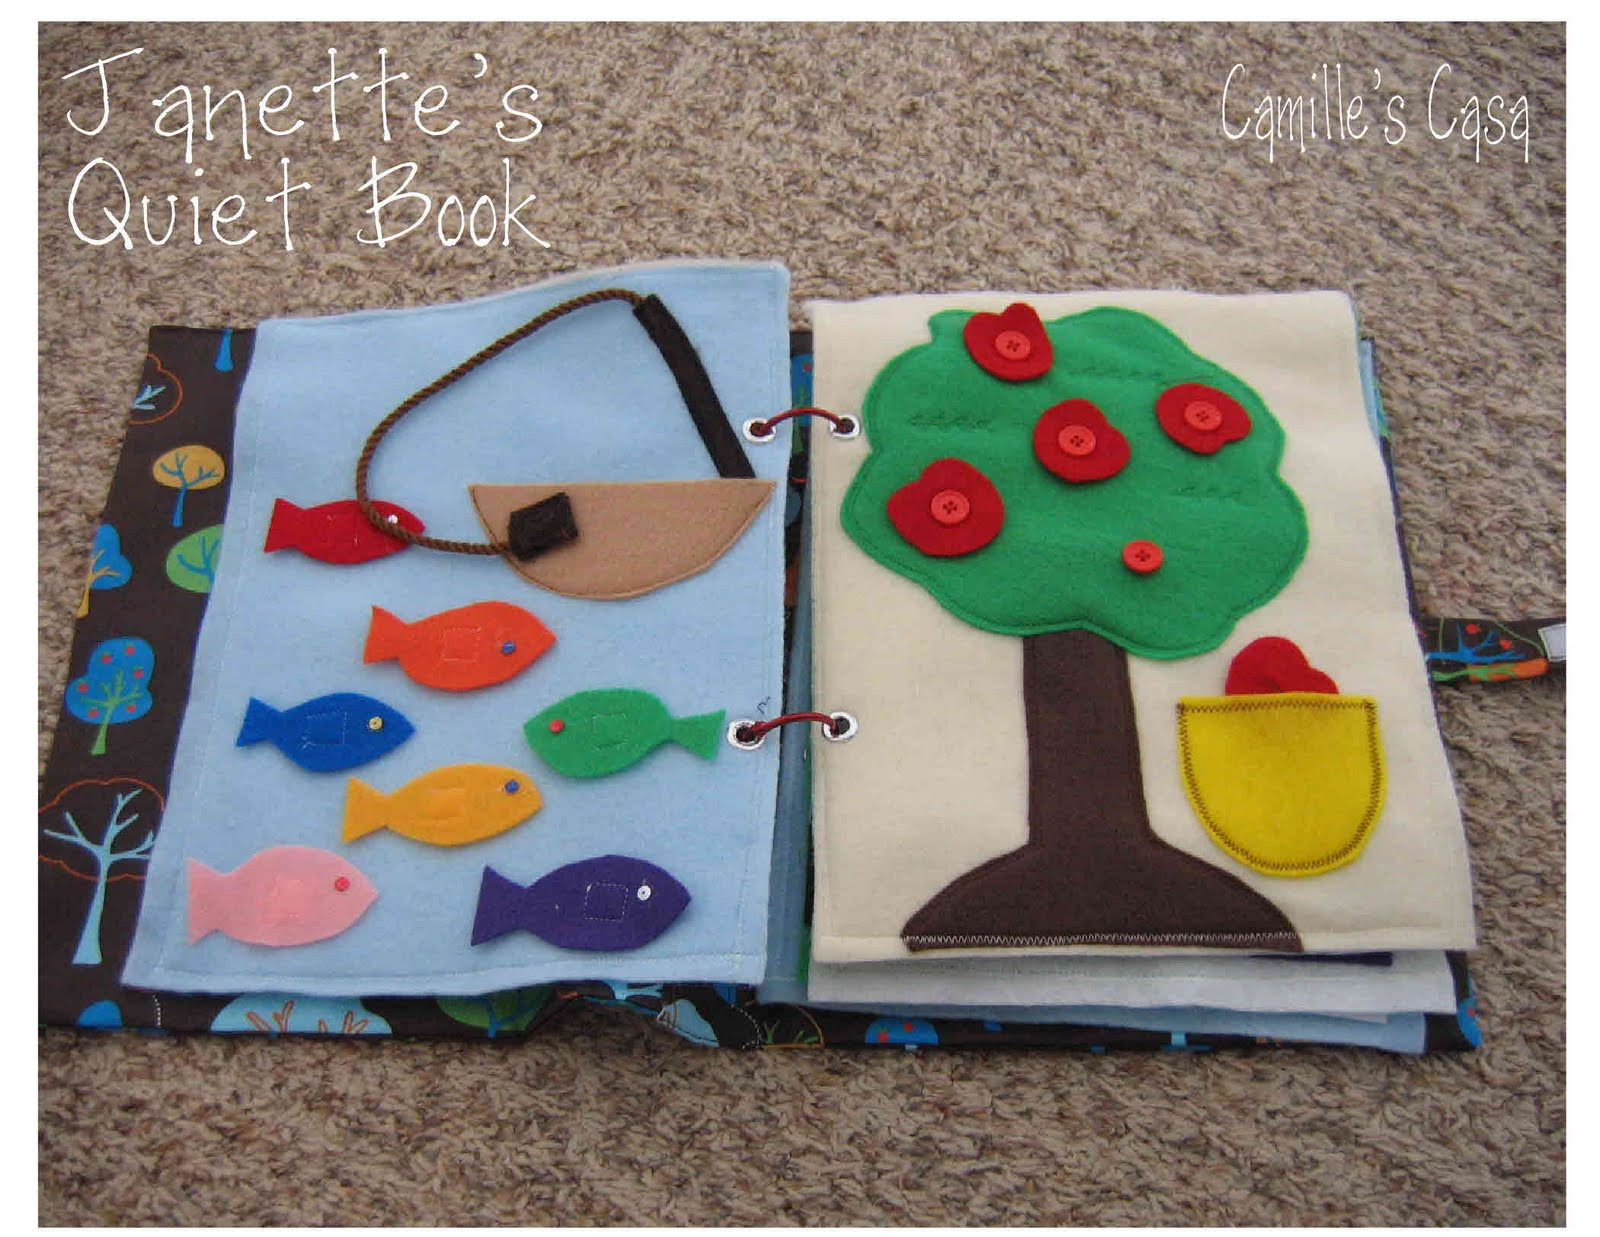 DIY Busy Book For Toddlers
 Camille s Casa Janette s Quiet Book